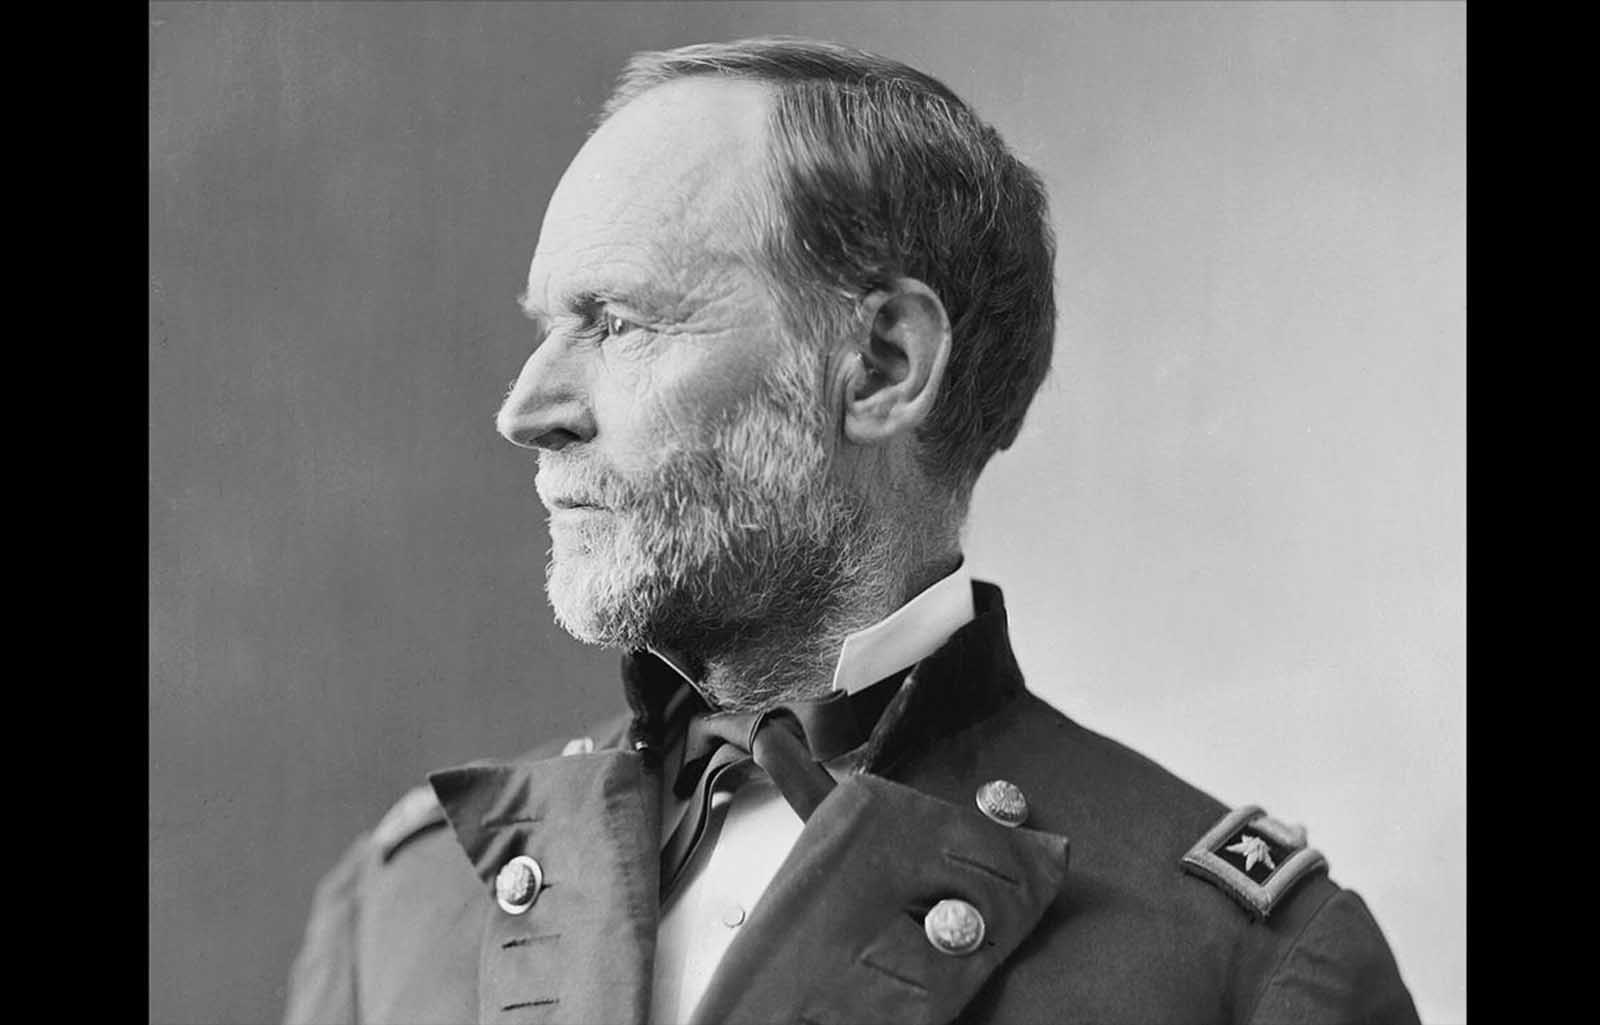 William Tecumseh Sherman, a graduate of the United States Military Academy at West Point, served as a General in the Union Army, commanding several campaigns. Perhaps best known was his capture of Atlanta, Georgia, after which his troops began 